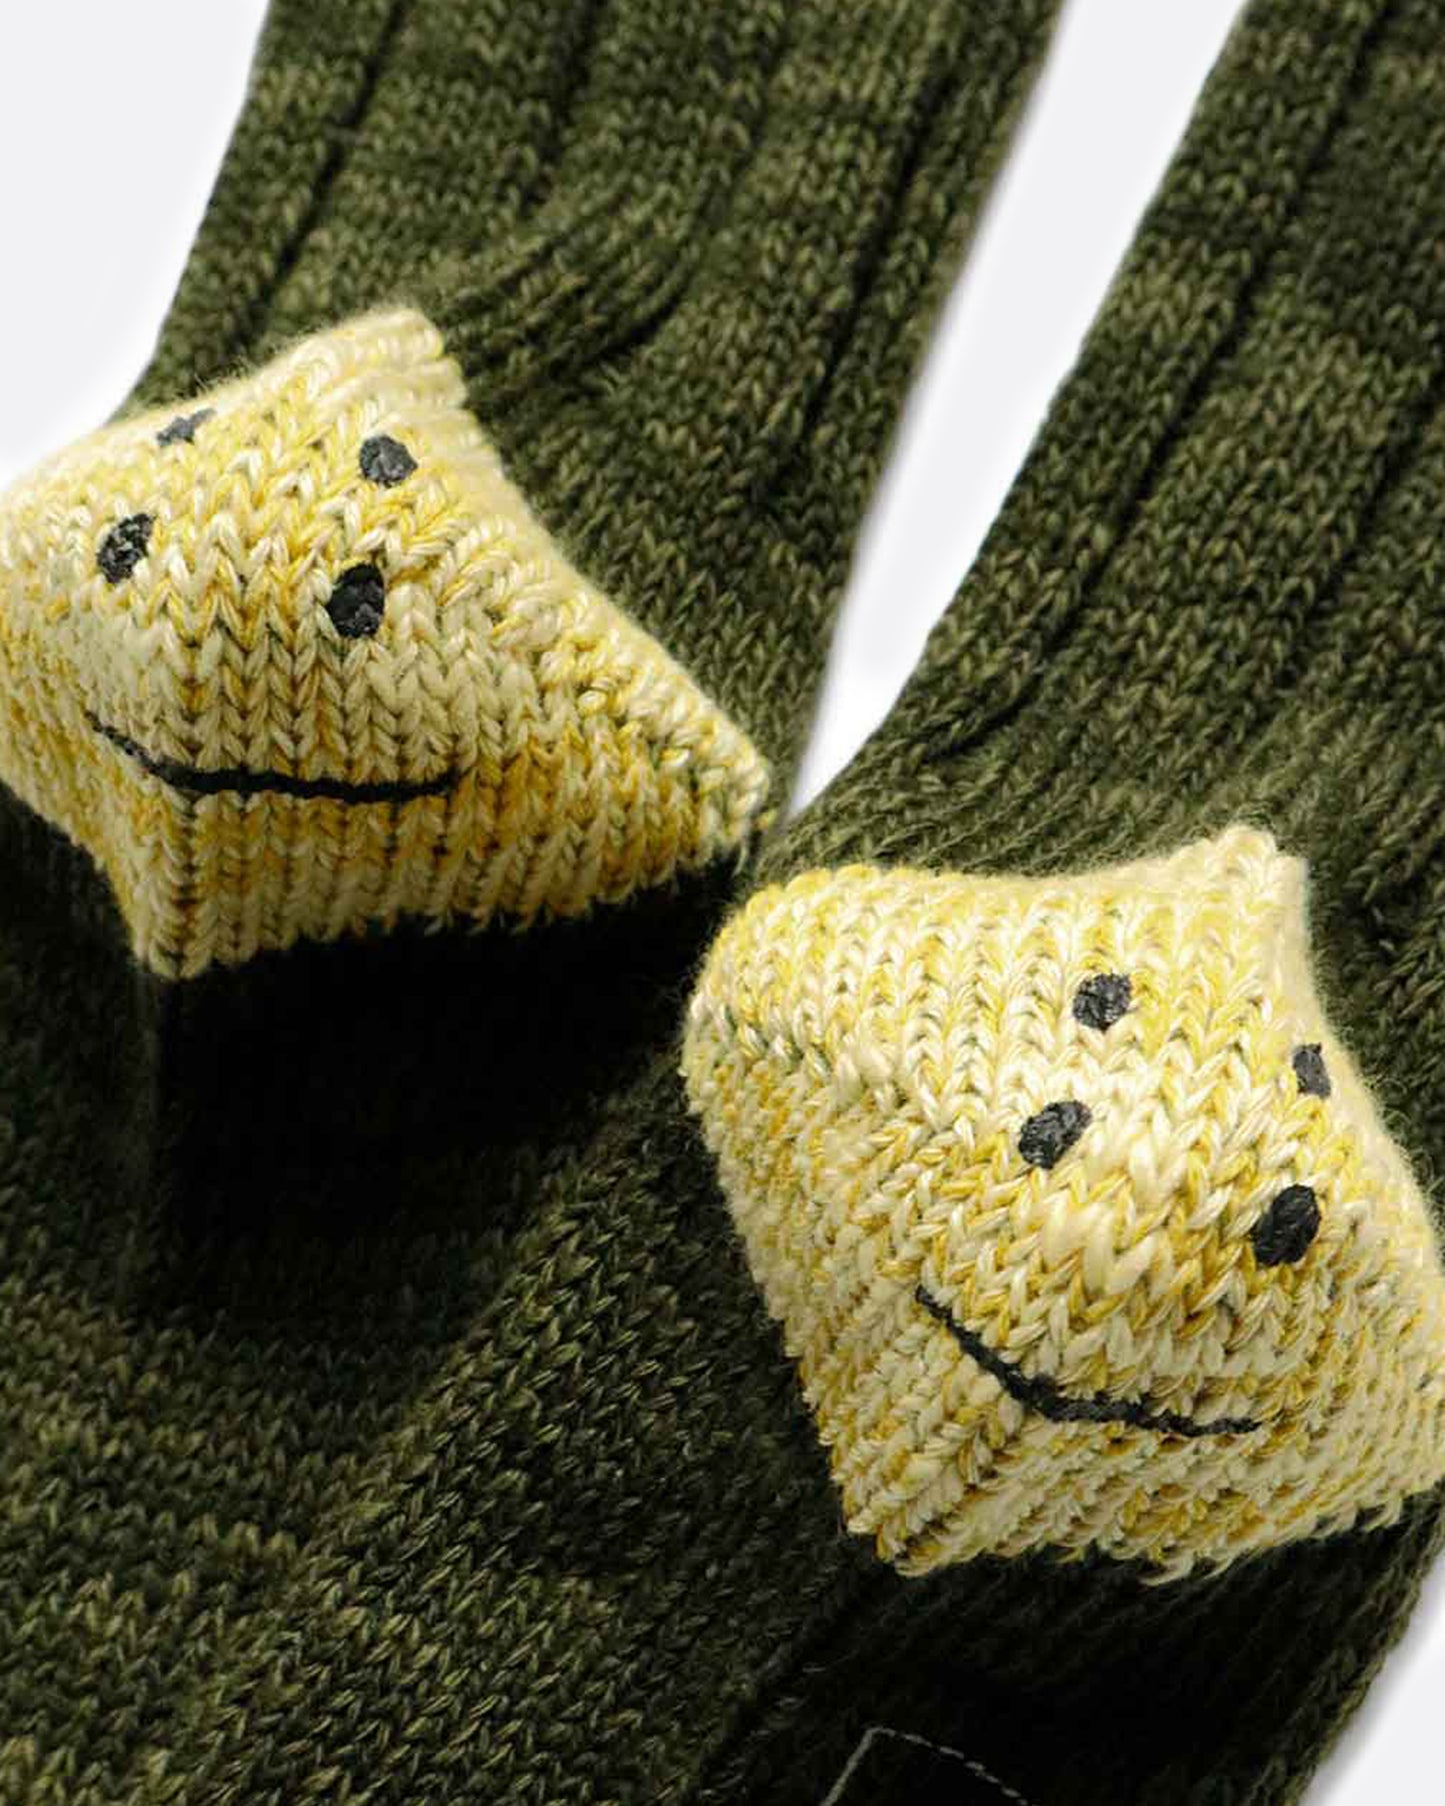 Everyone's favorite smiley socks, this time in a stretchy, breathable cotton blend.